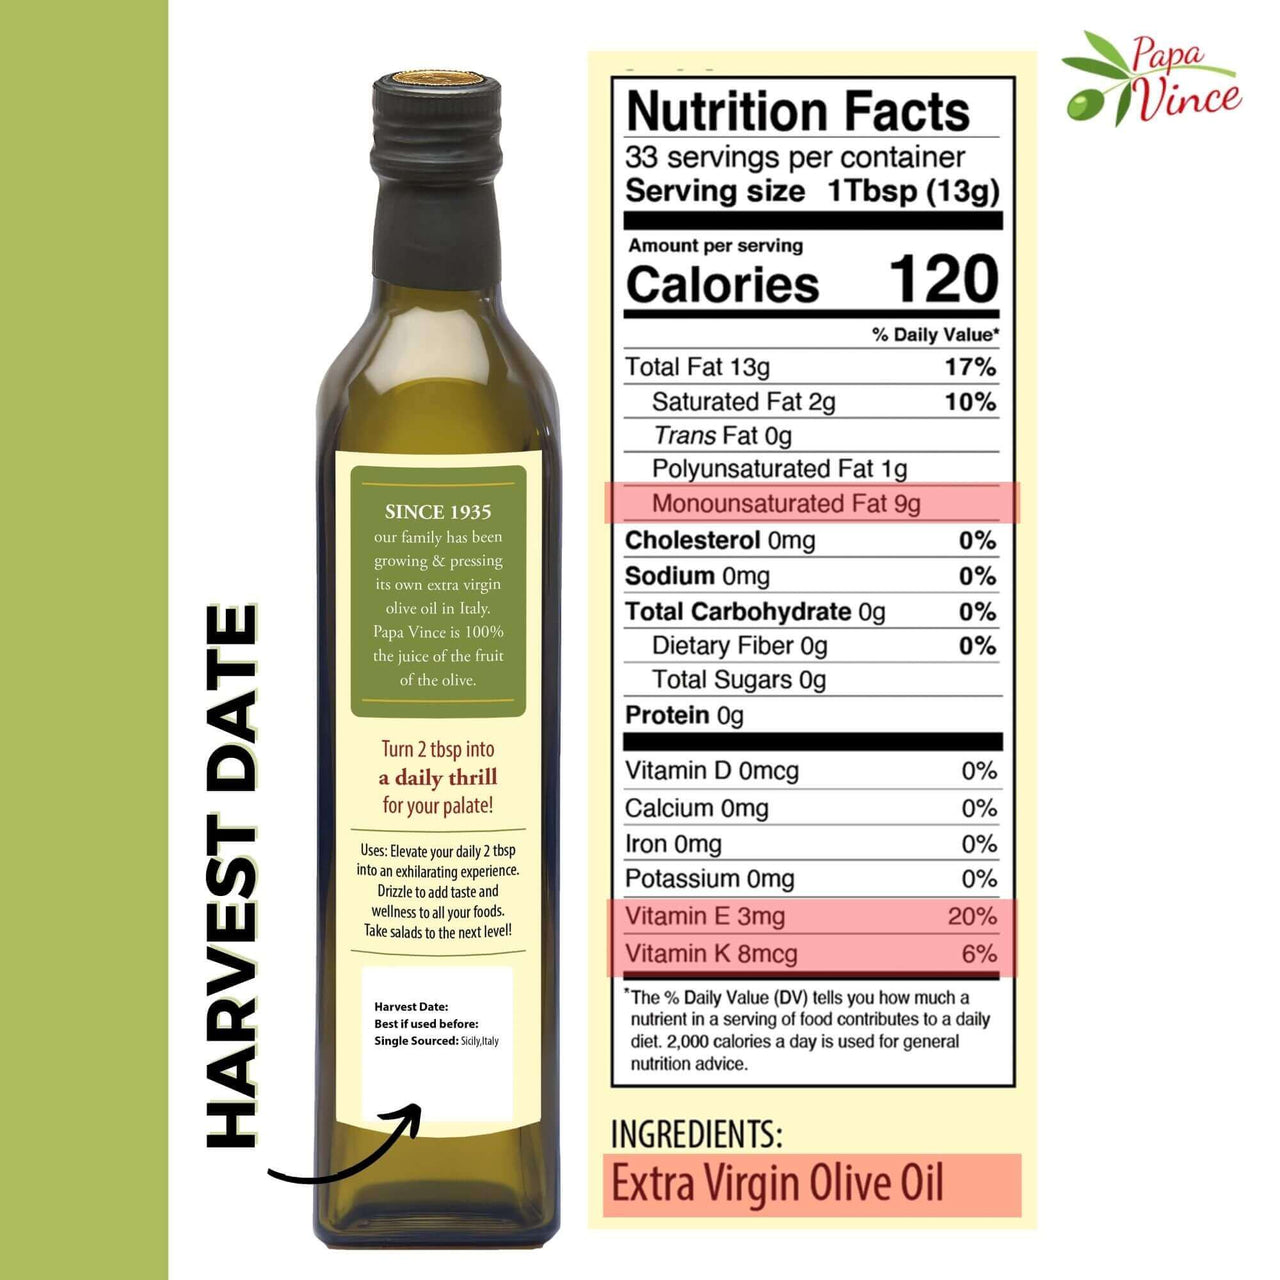 Papa Vince Olive Oil Extra Virgin - 4Bottles Save $23.00 with Subscription - Papa Vince